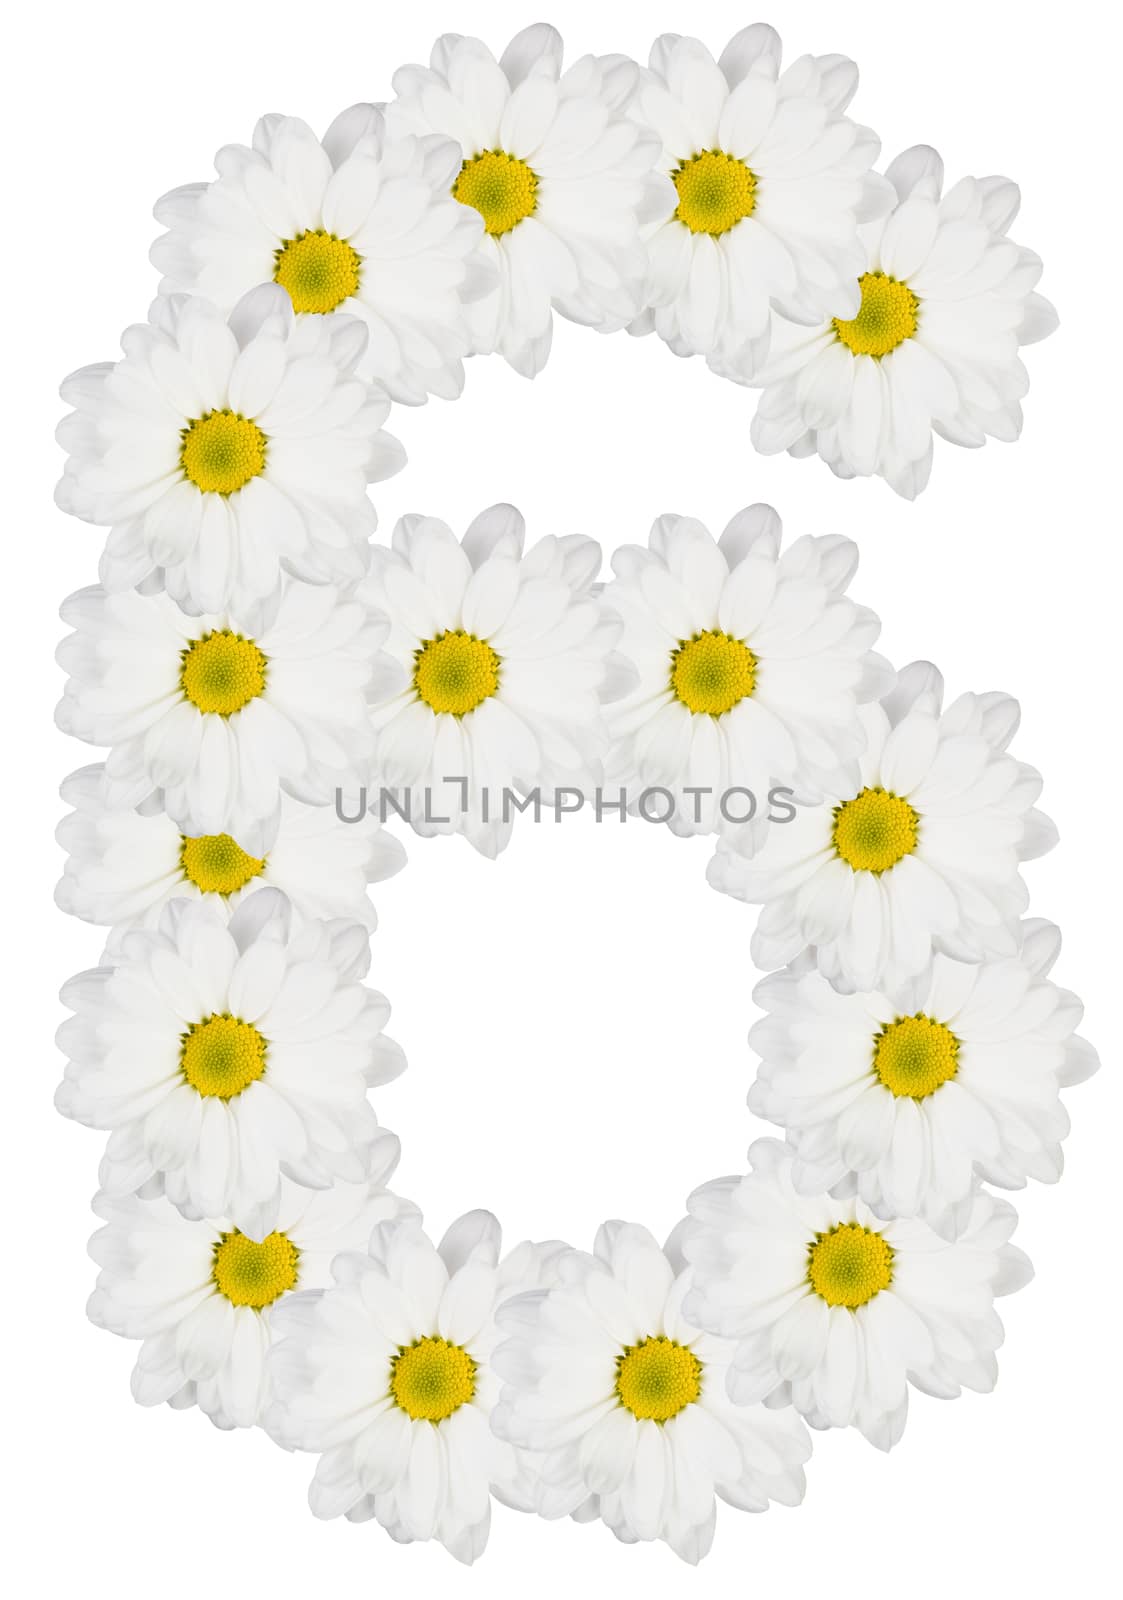 Number 6 made from white flowers